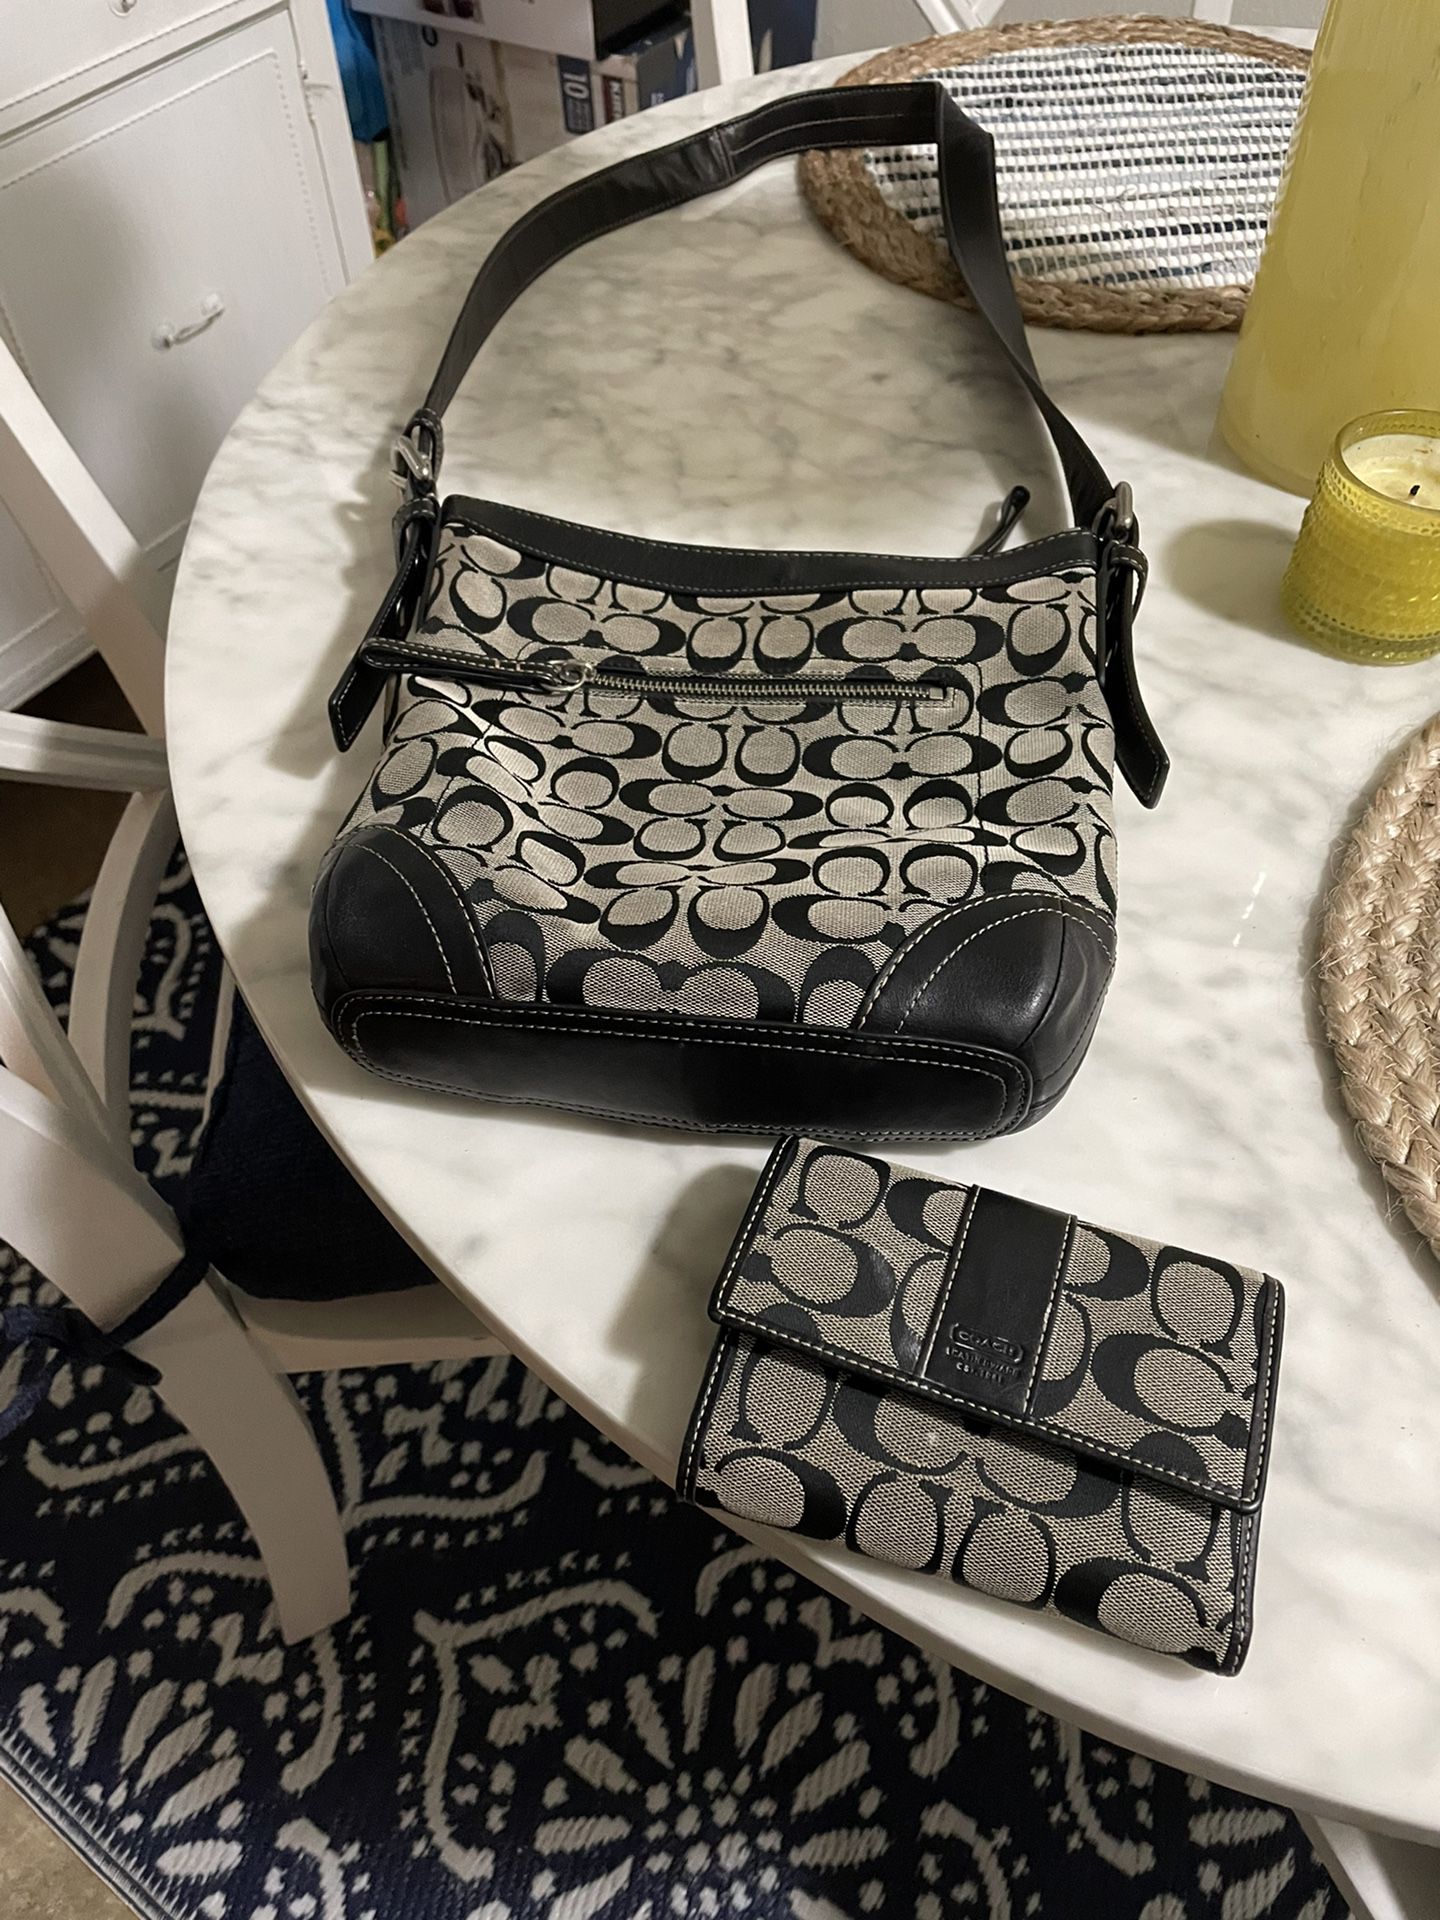 Coach Purse And Wallet Set for Sale in Lemon Grove, CA - OfferUp